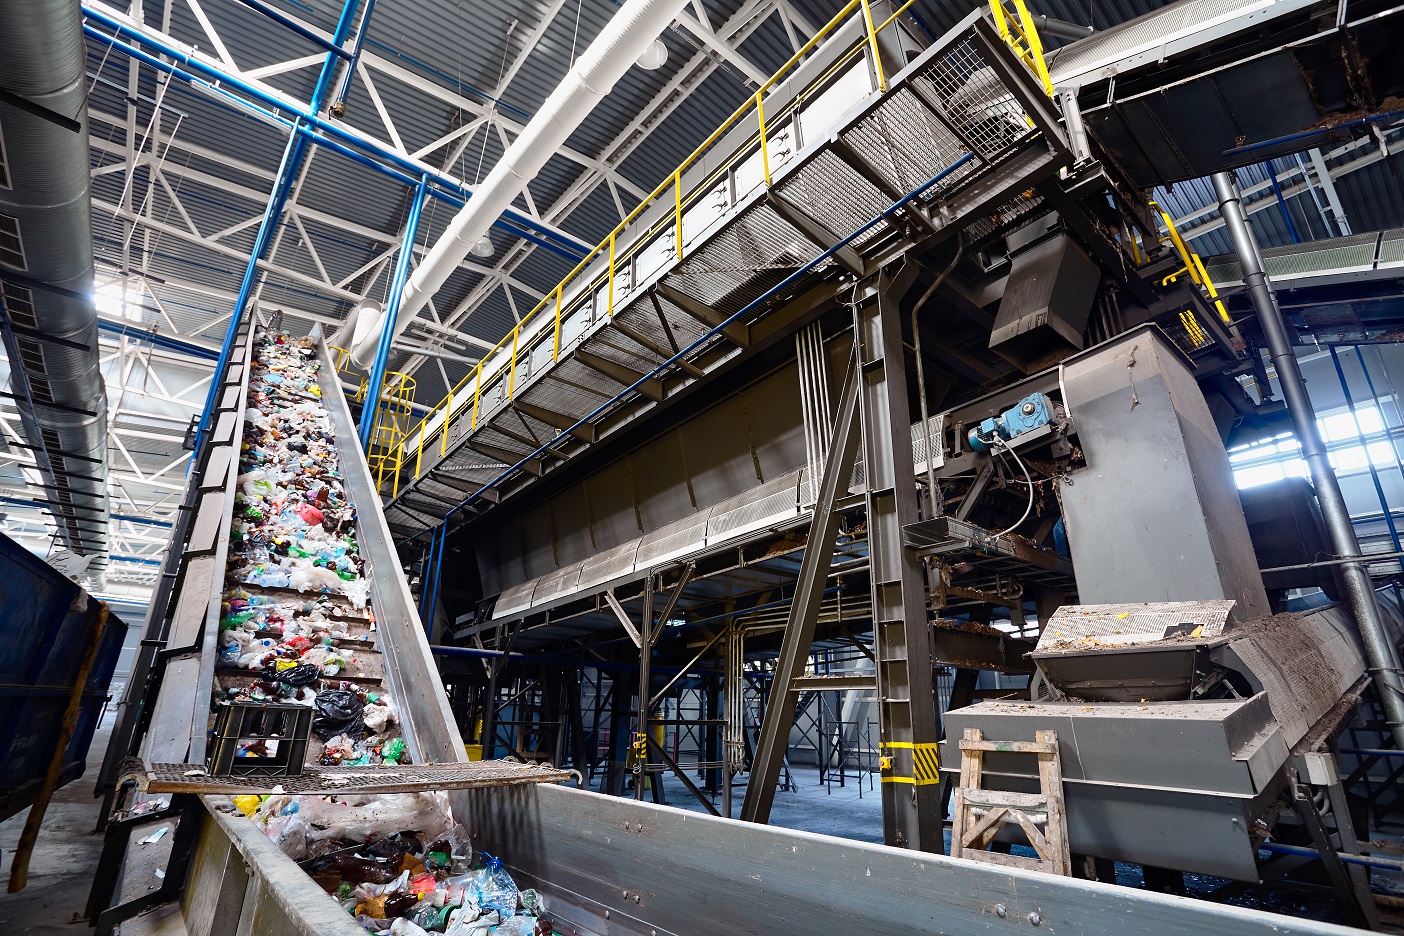 Dow, LyondellBasell and NOVA Chemicals invest in Scalable Recycling Technologies